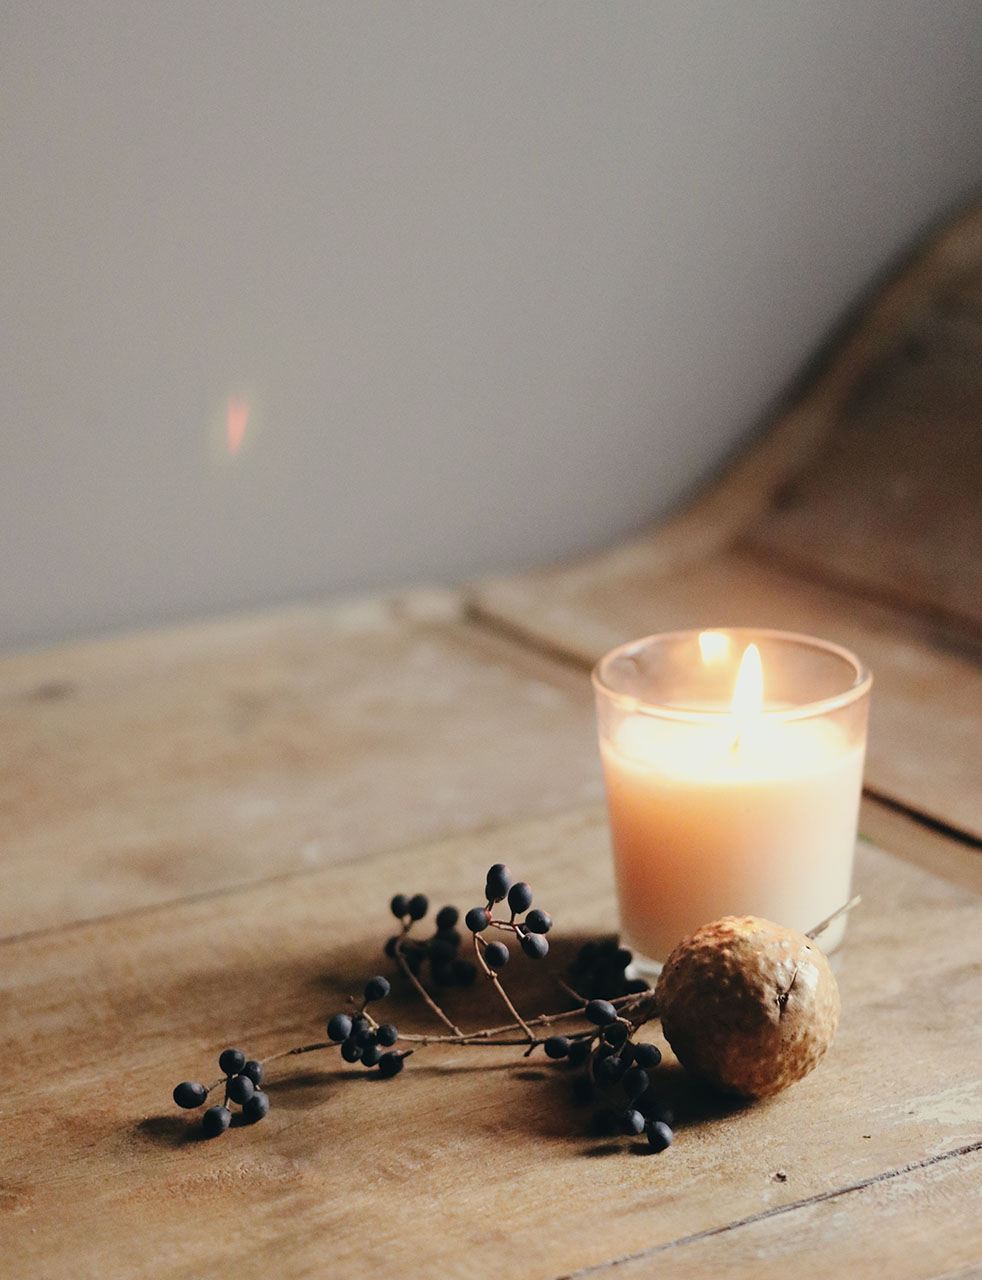 Candle in a glass on a wooden floor with seasonal decoration next to it